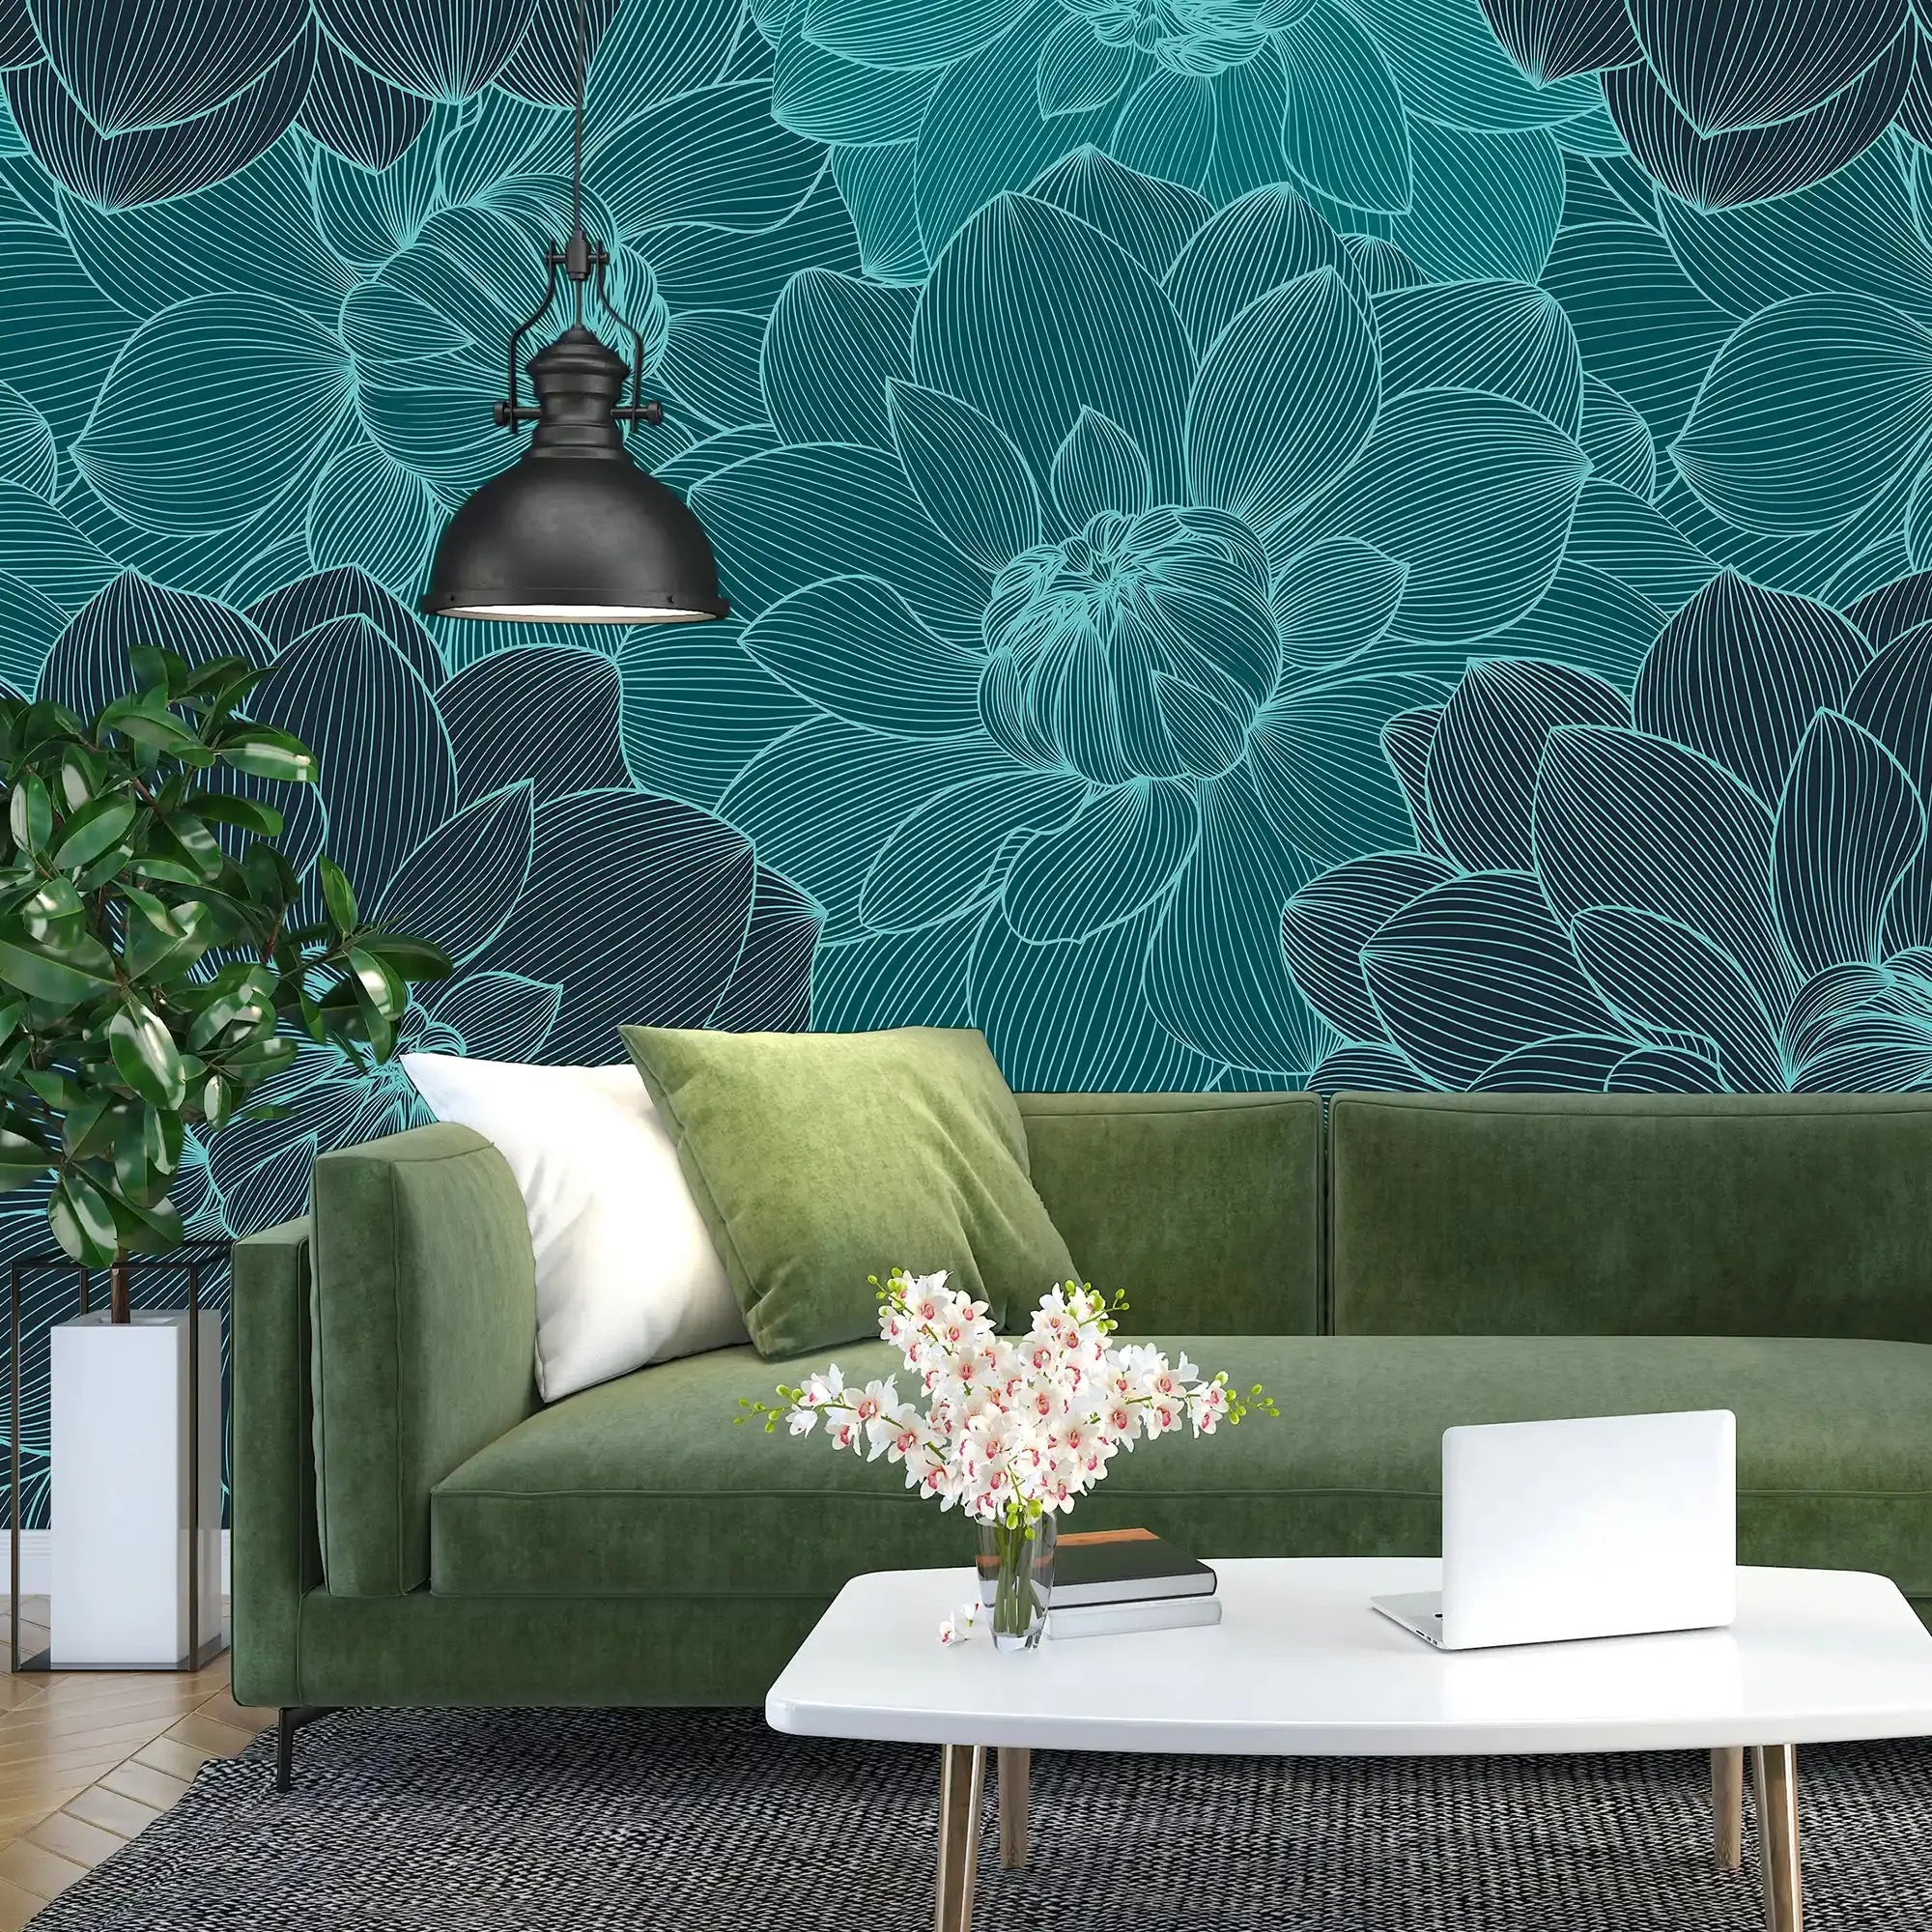 3090-E / Trendy Geometric Floral Self-Adhesive Wallpaper: Transform Your Walls with Easy Install - Artevella